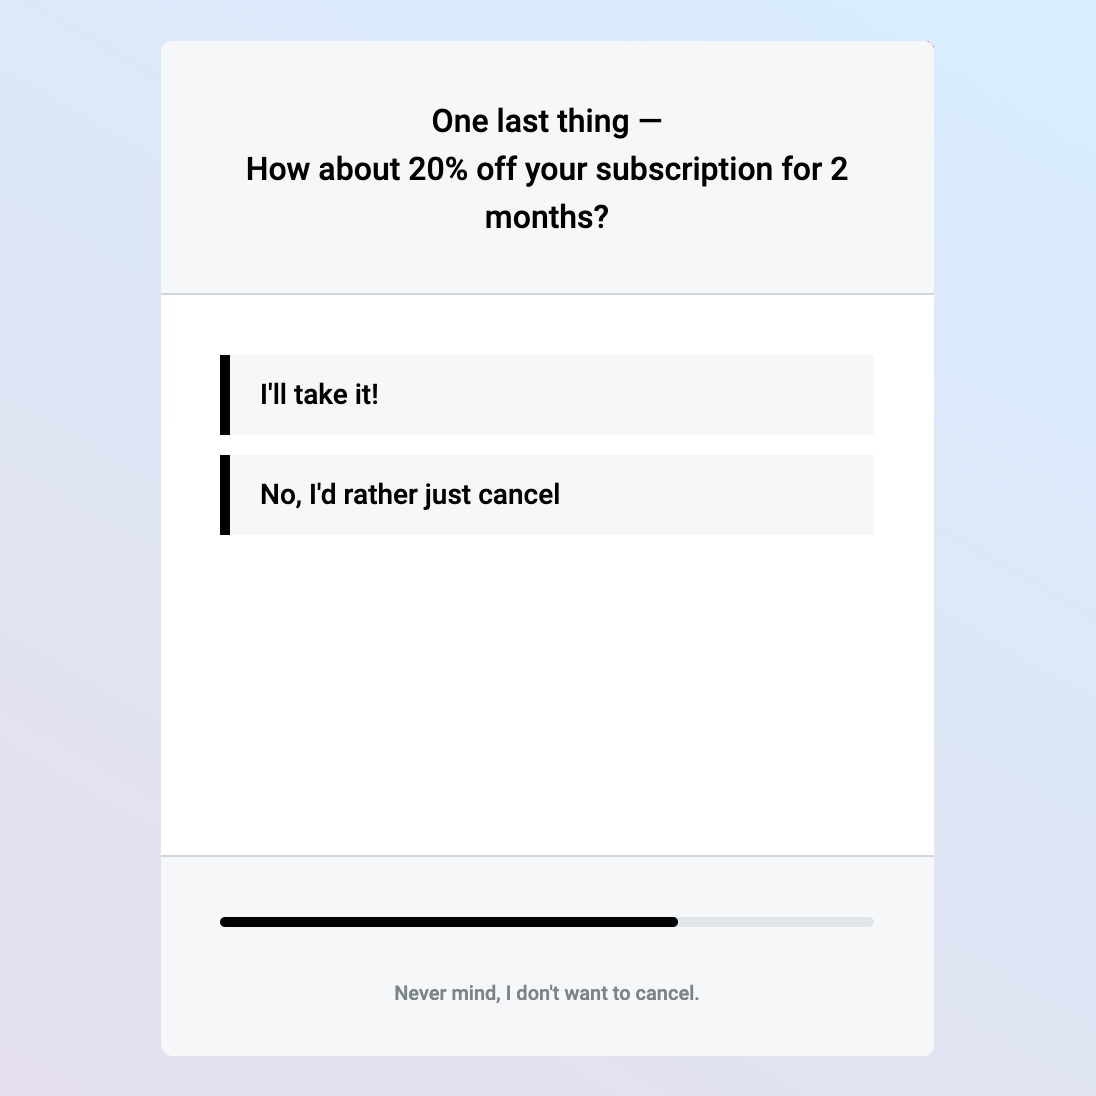 Retain Cancellation Flow modal step 4. It says: One last thing — how about 20% off your subscription for 2 months? The options are: I'll take it!, No, I'd rather just cancel.